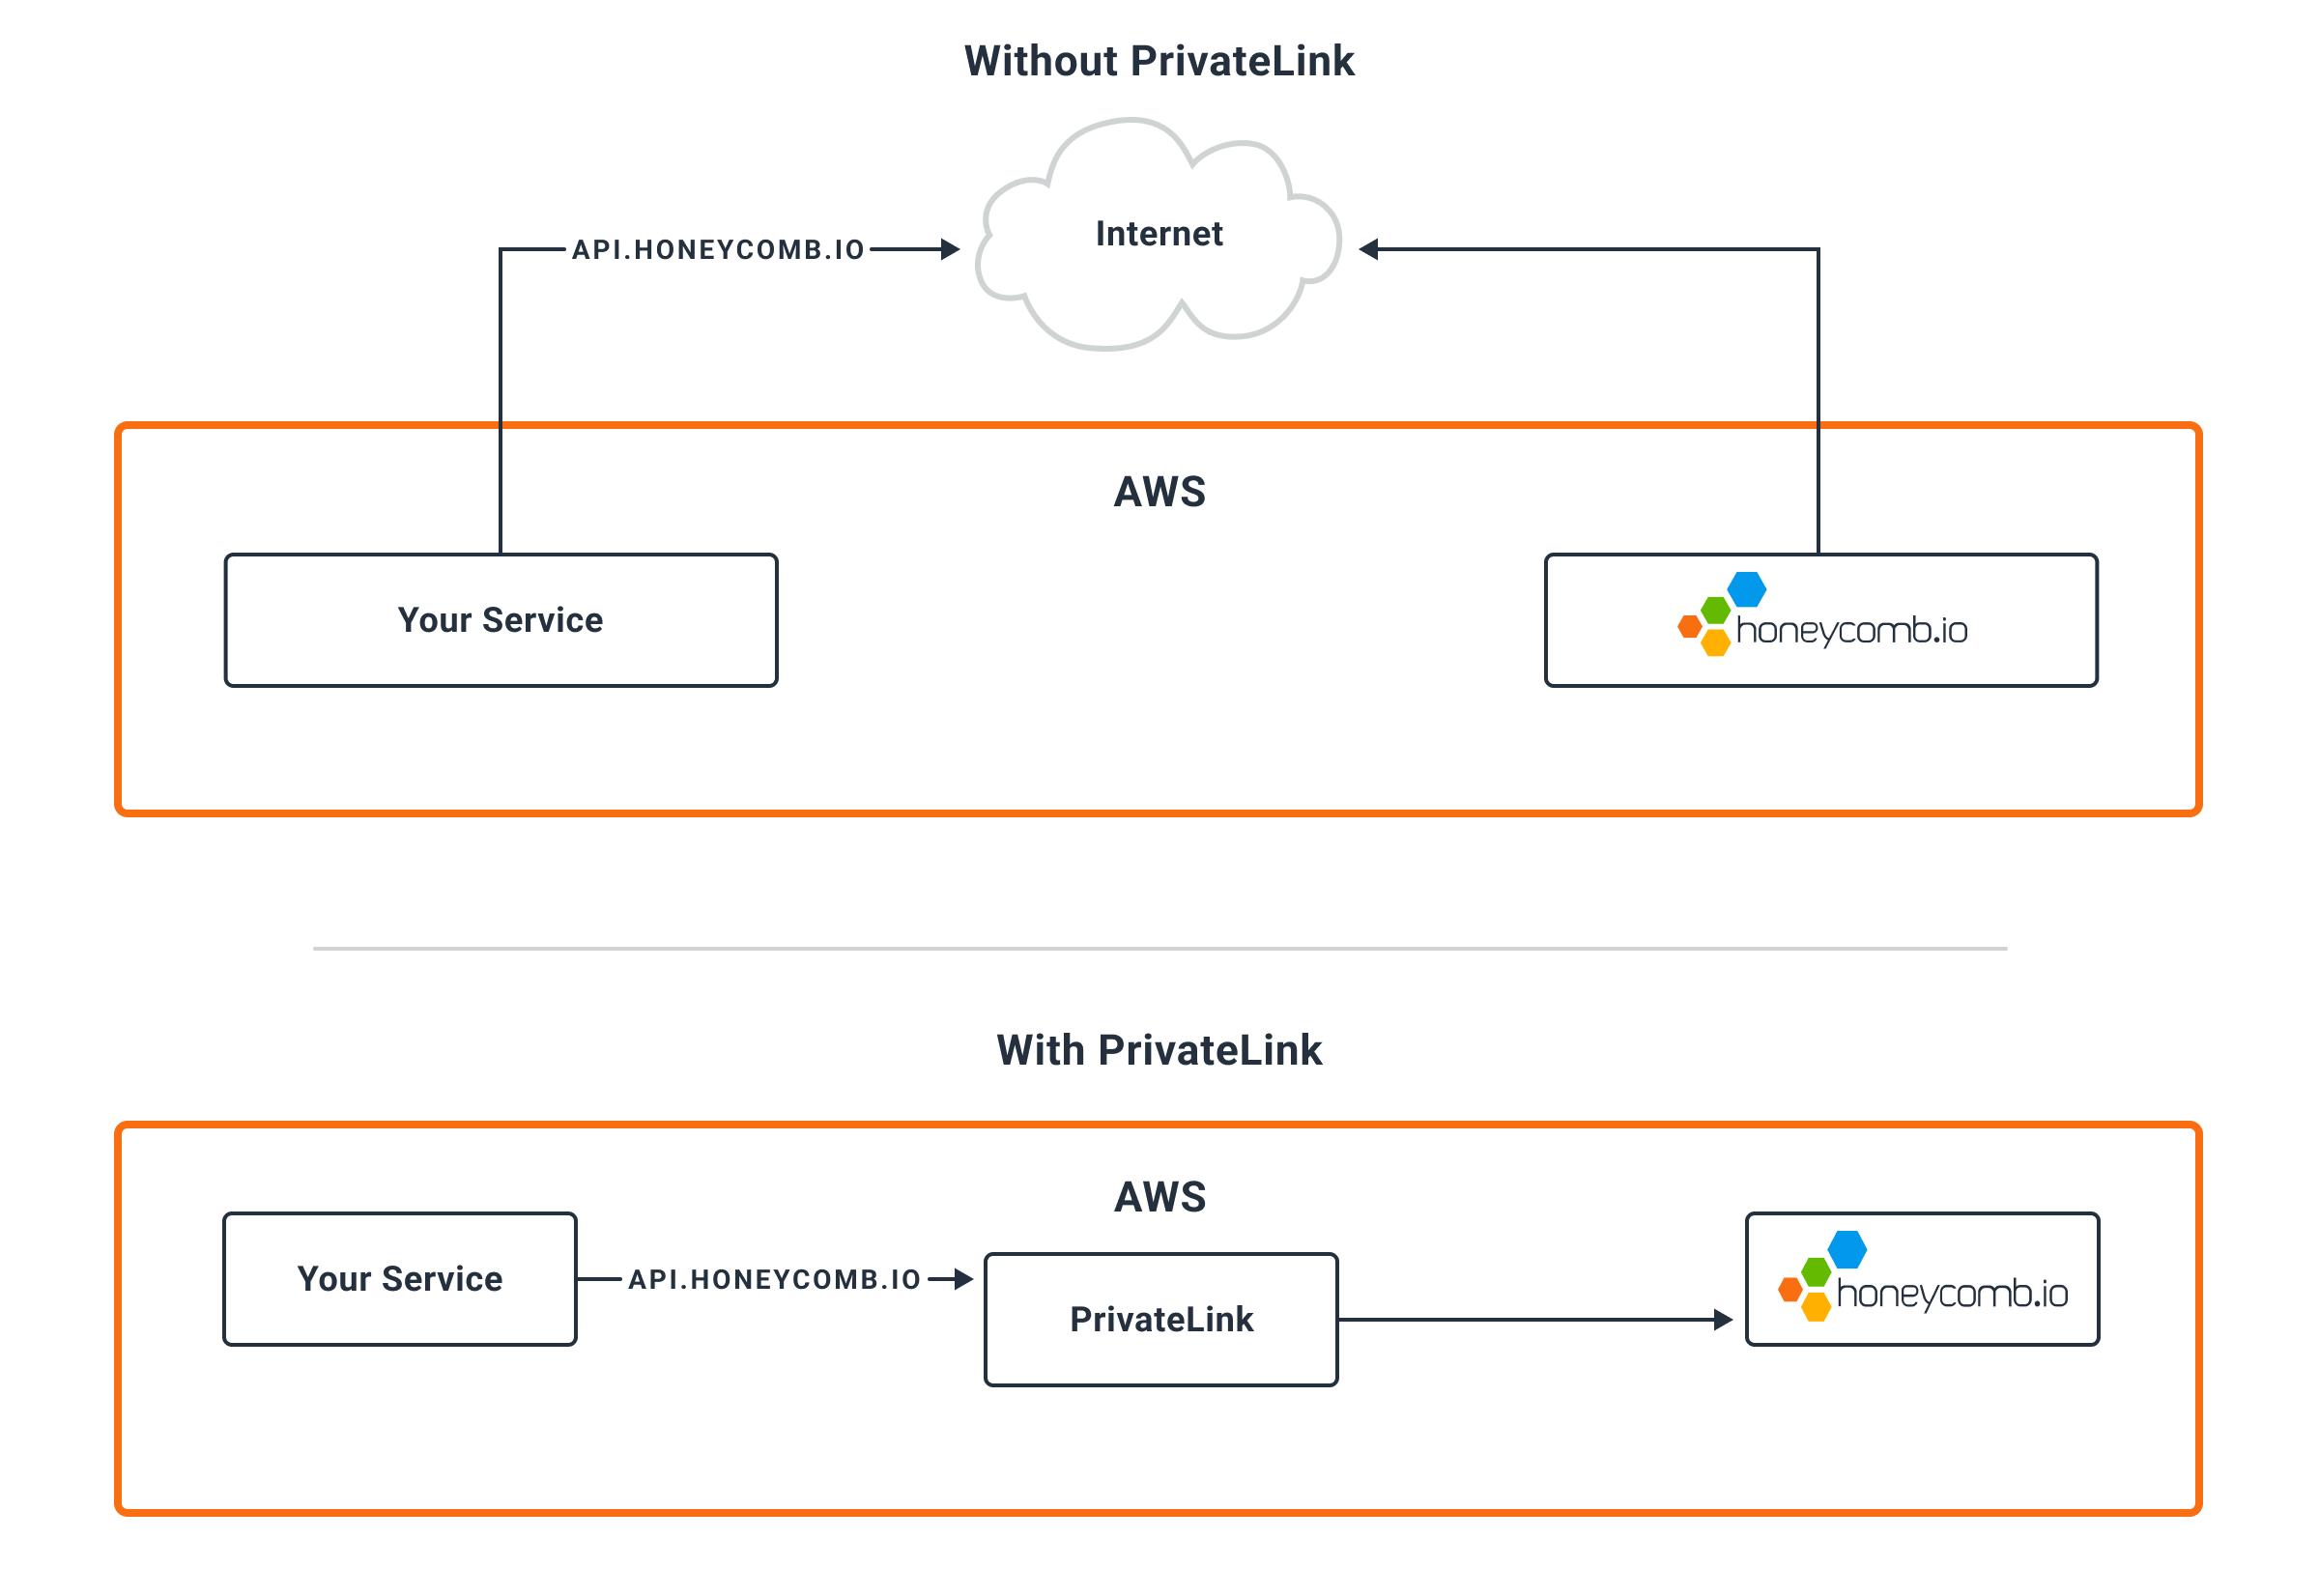 Comparison of the networking with and without PrivateLink. With PrivateLink, network traffic stays in AWS, and without, it goes over the public internet.